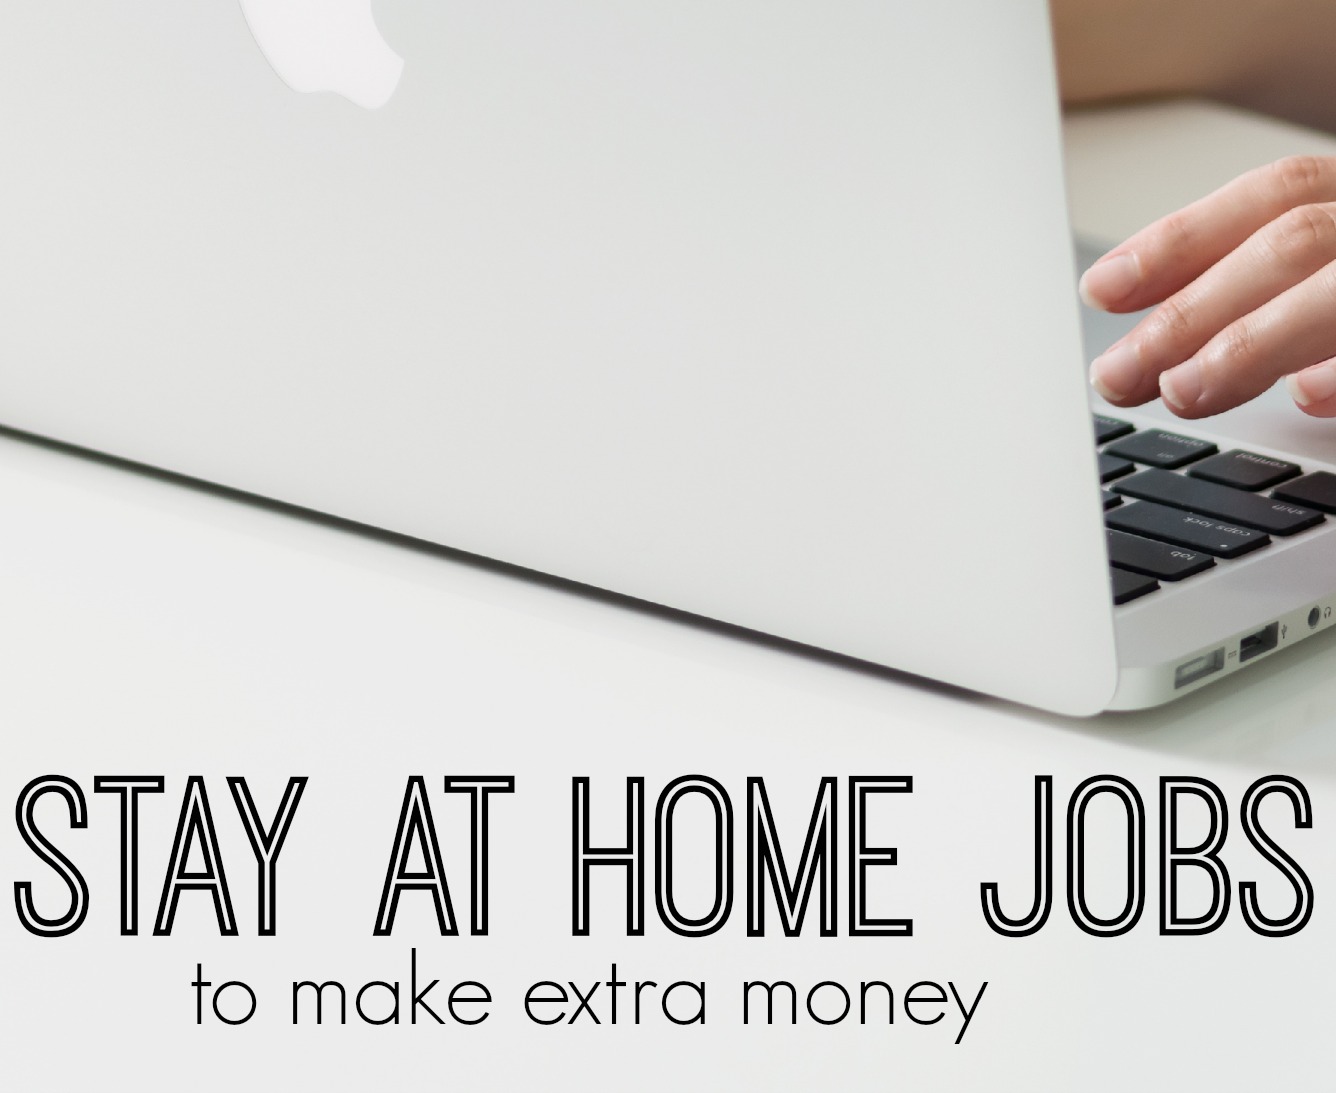 Work at Home and make money. Stay at Home and work. No easy stay. Stay easy